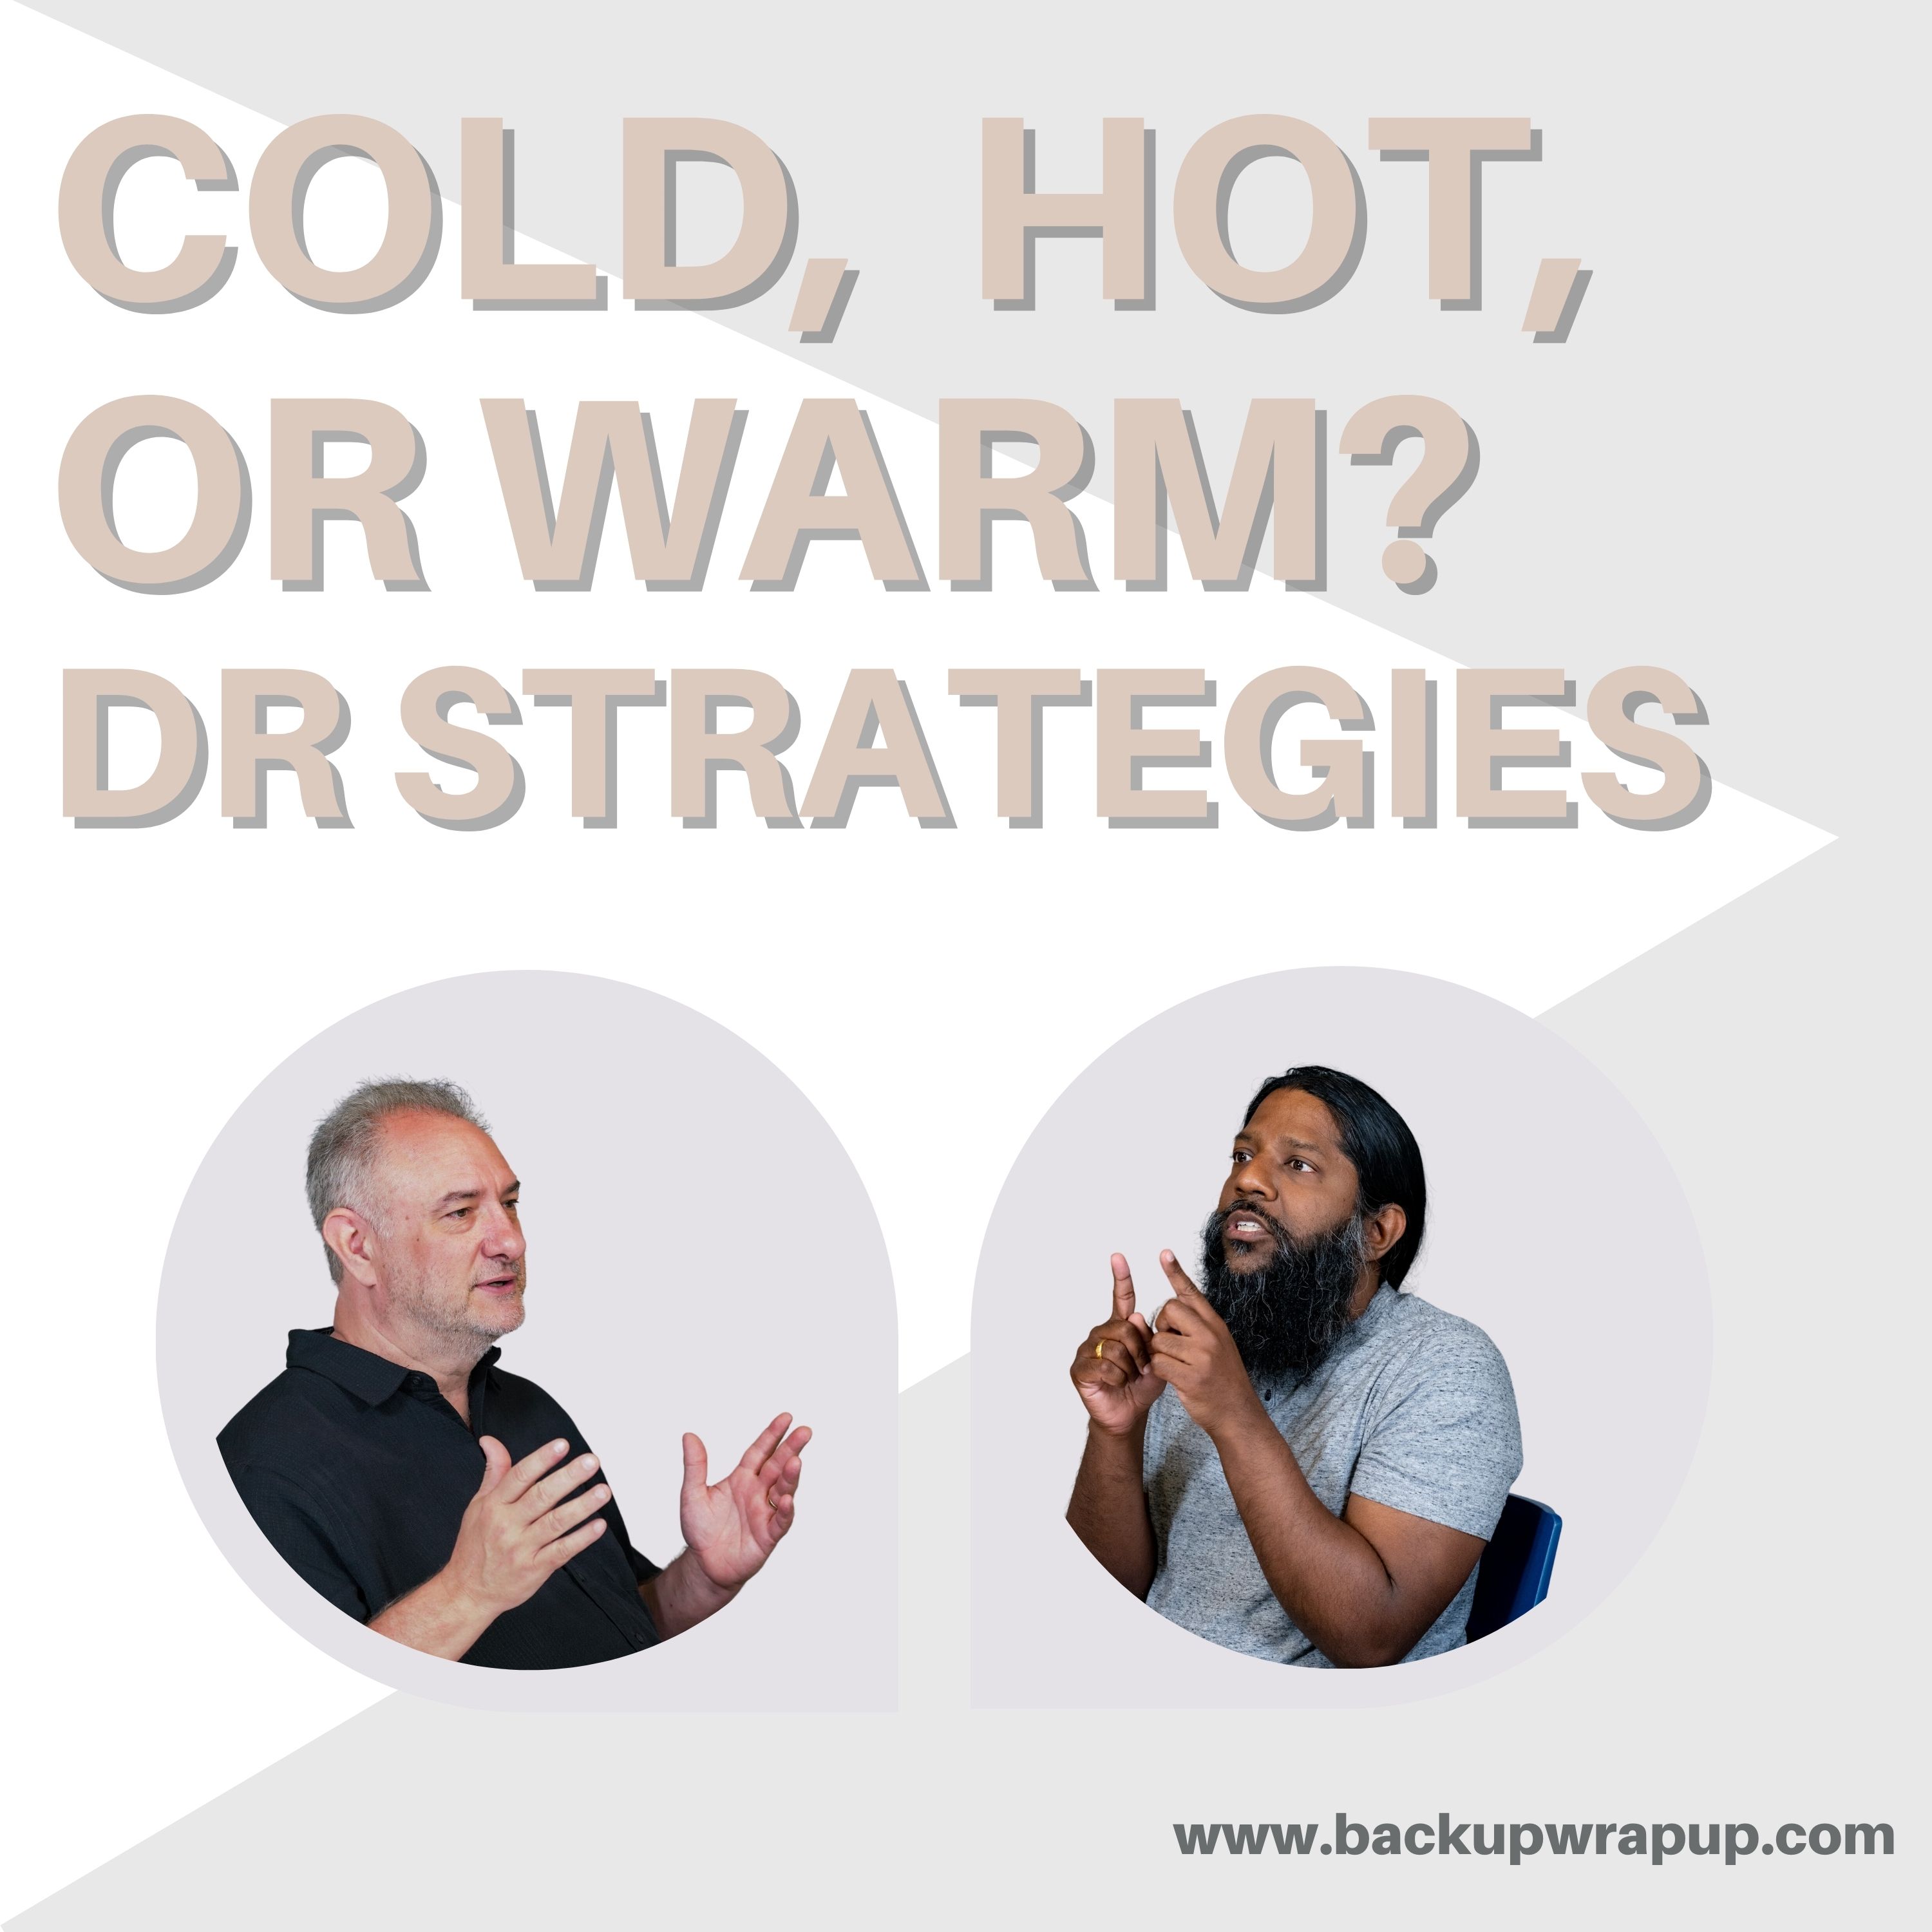 Hot, Warm, and Cold: DR Site Strategies